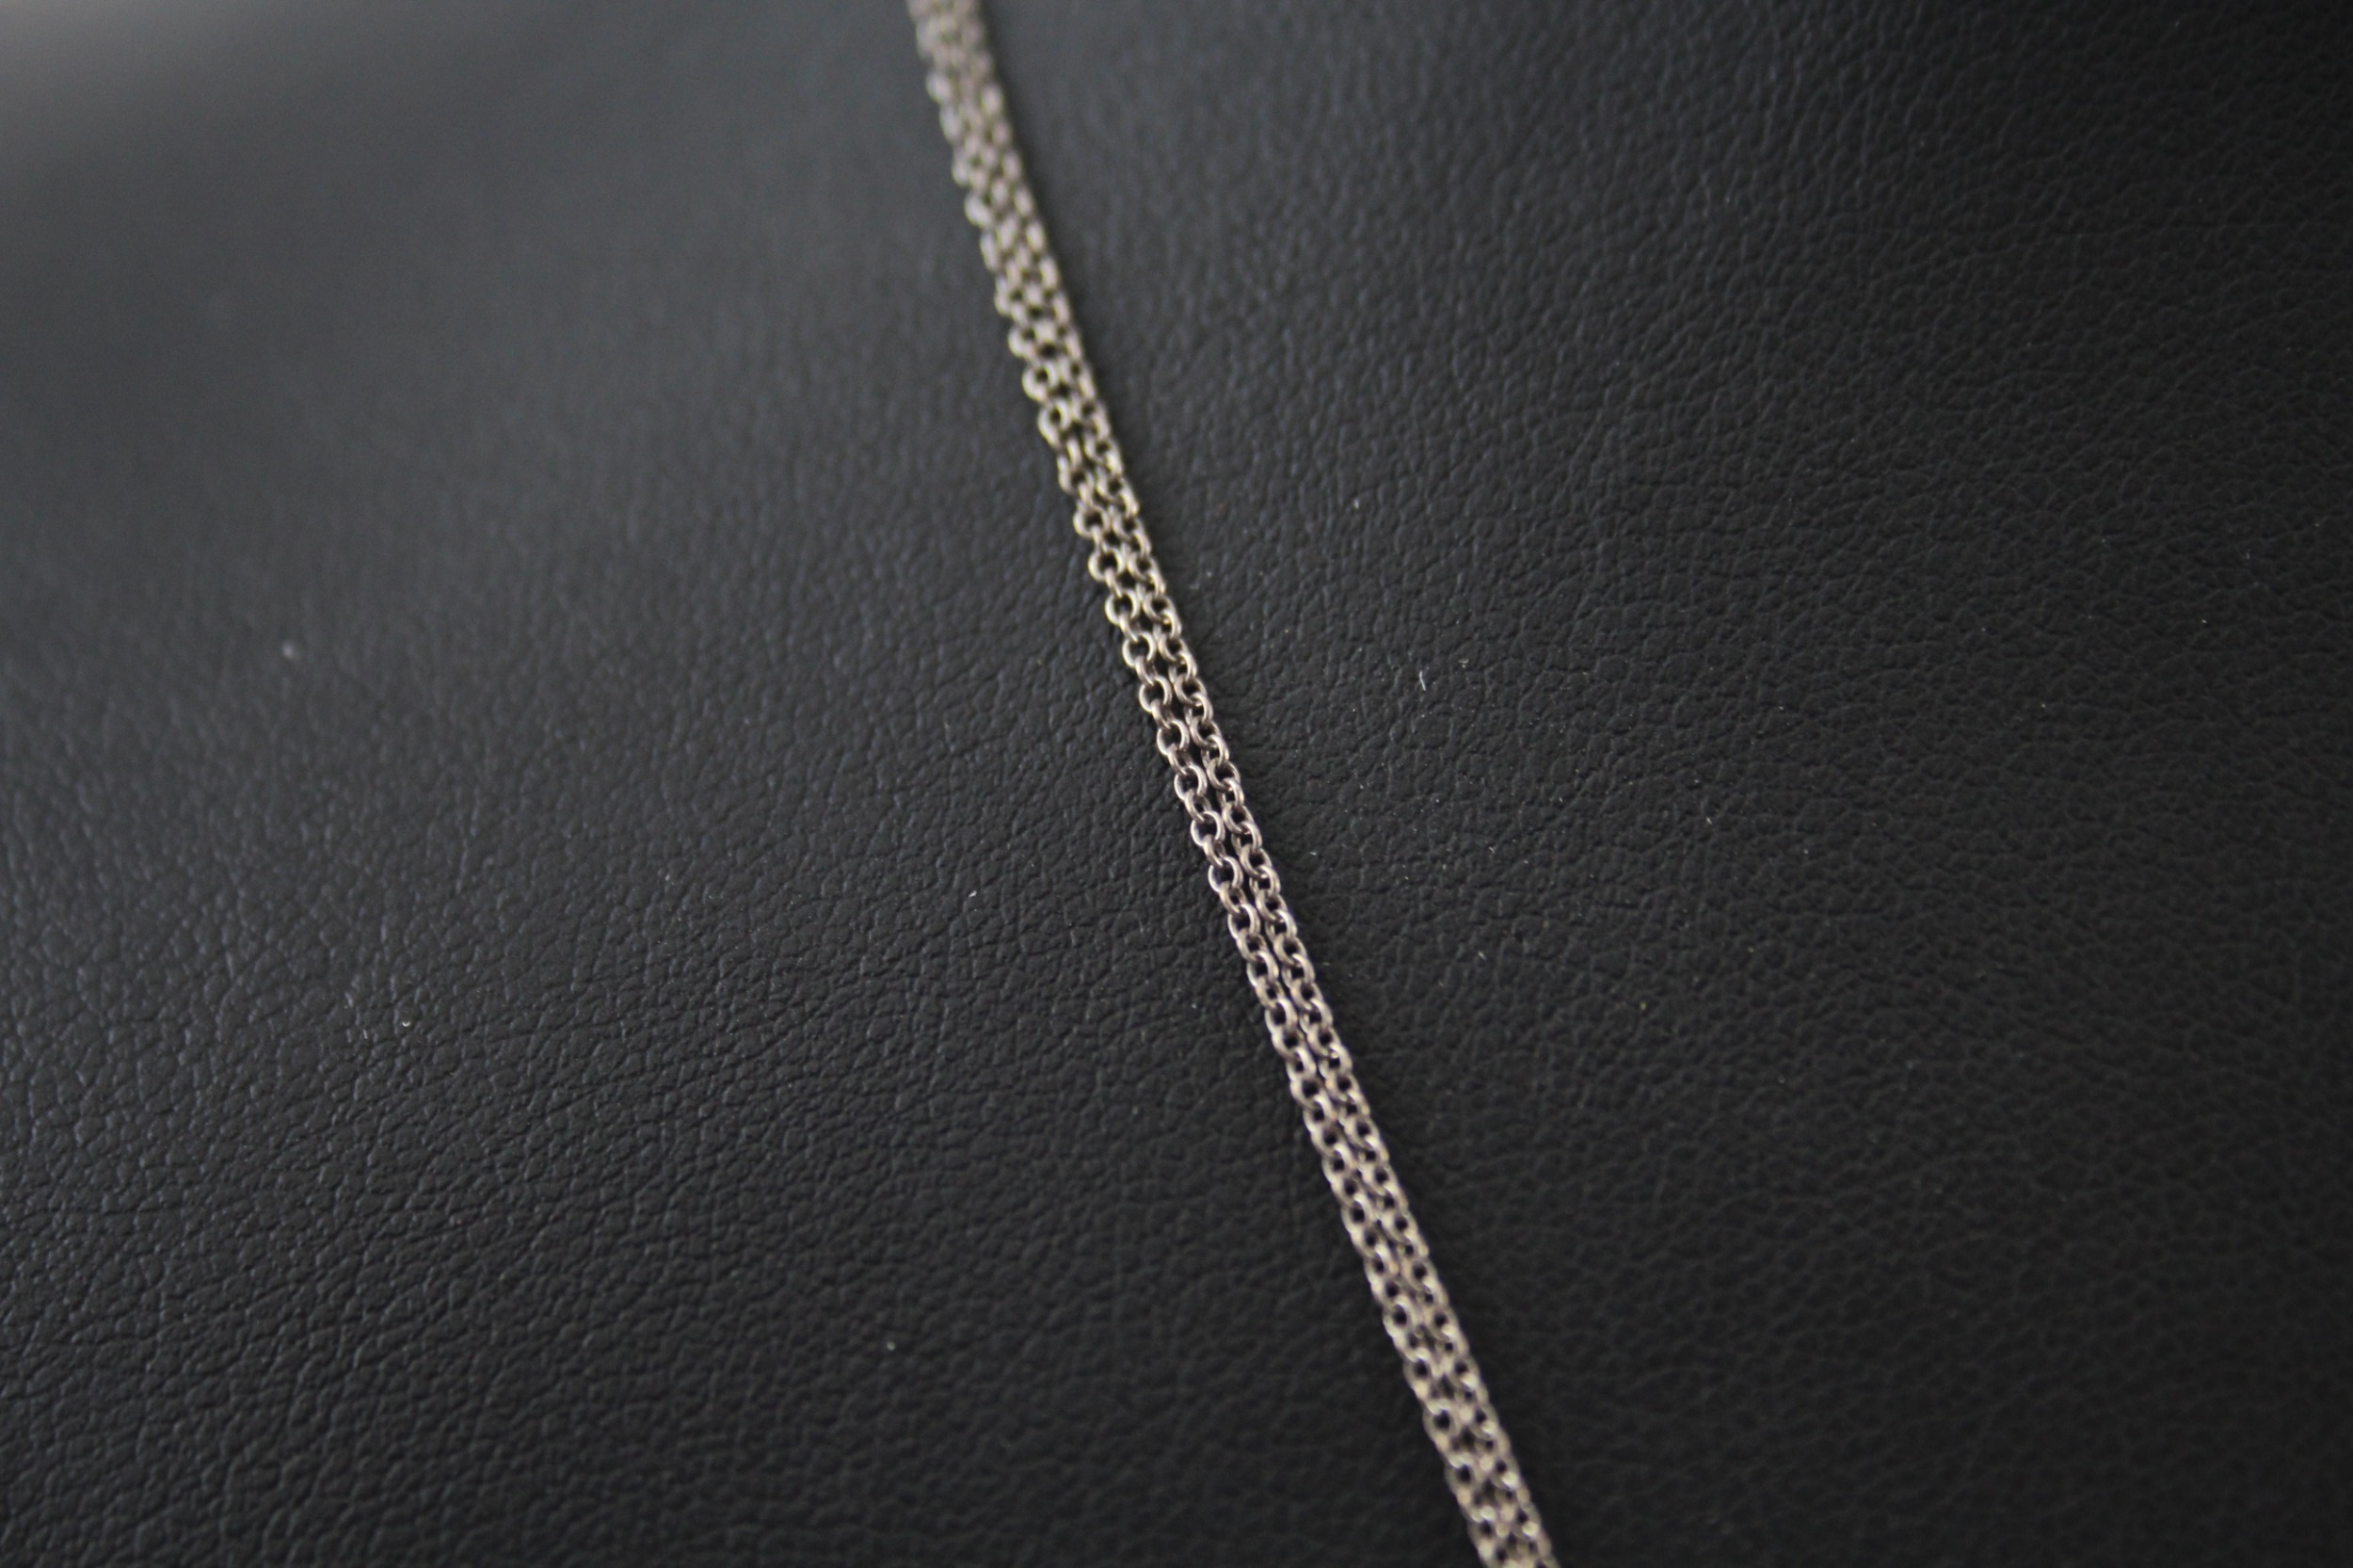 Silver multi strand necklace with heart pendant by designer Tiffany & Co (4g) - Image 3 of 6